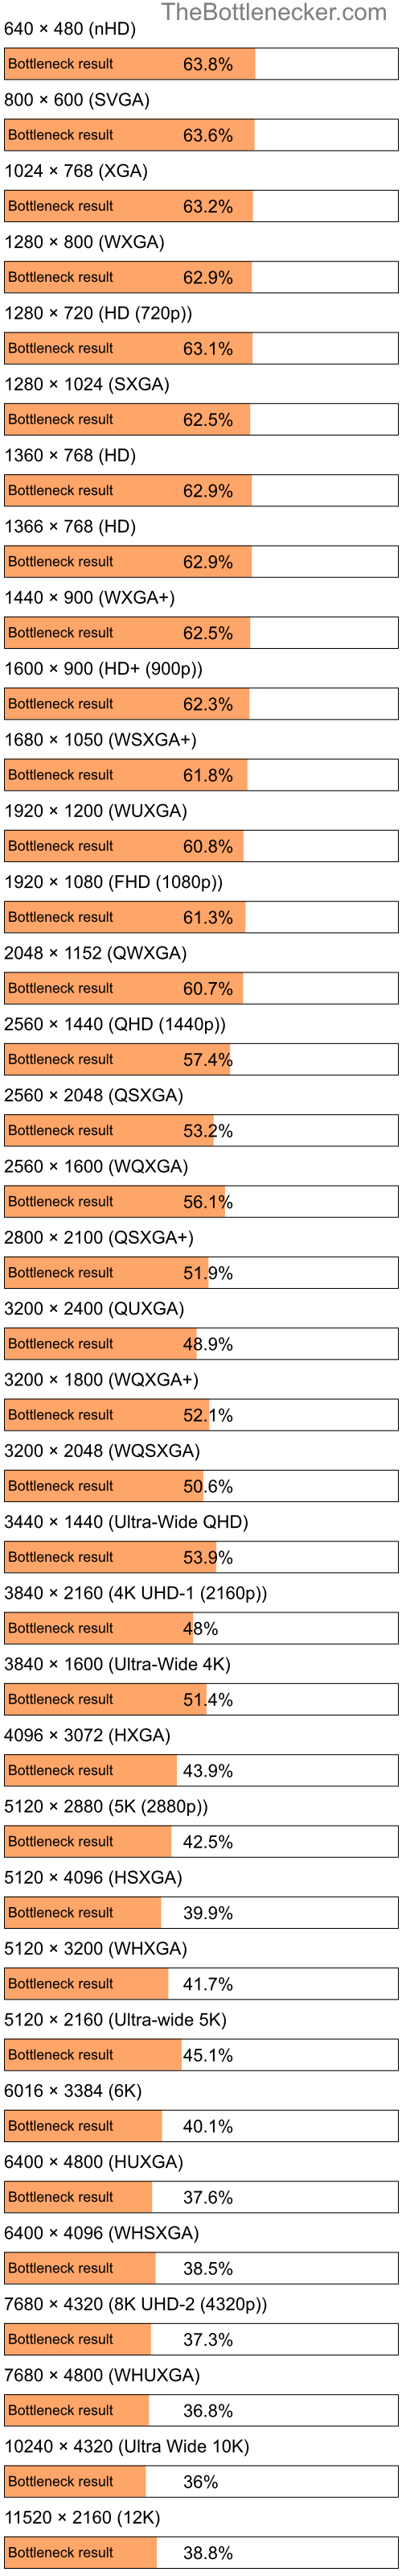 Bottleneck results by resolution for AMD Ryzen 5 3400G and NVIDIA GeForce RTX 4090 in General Tasks